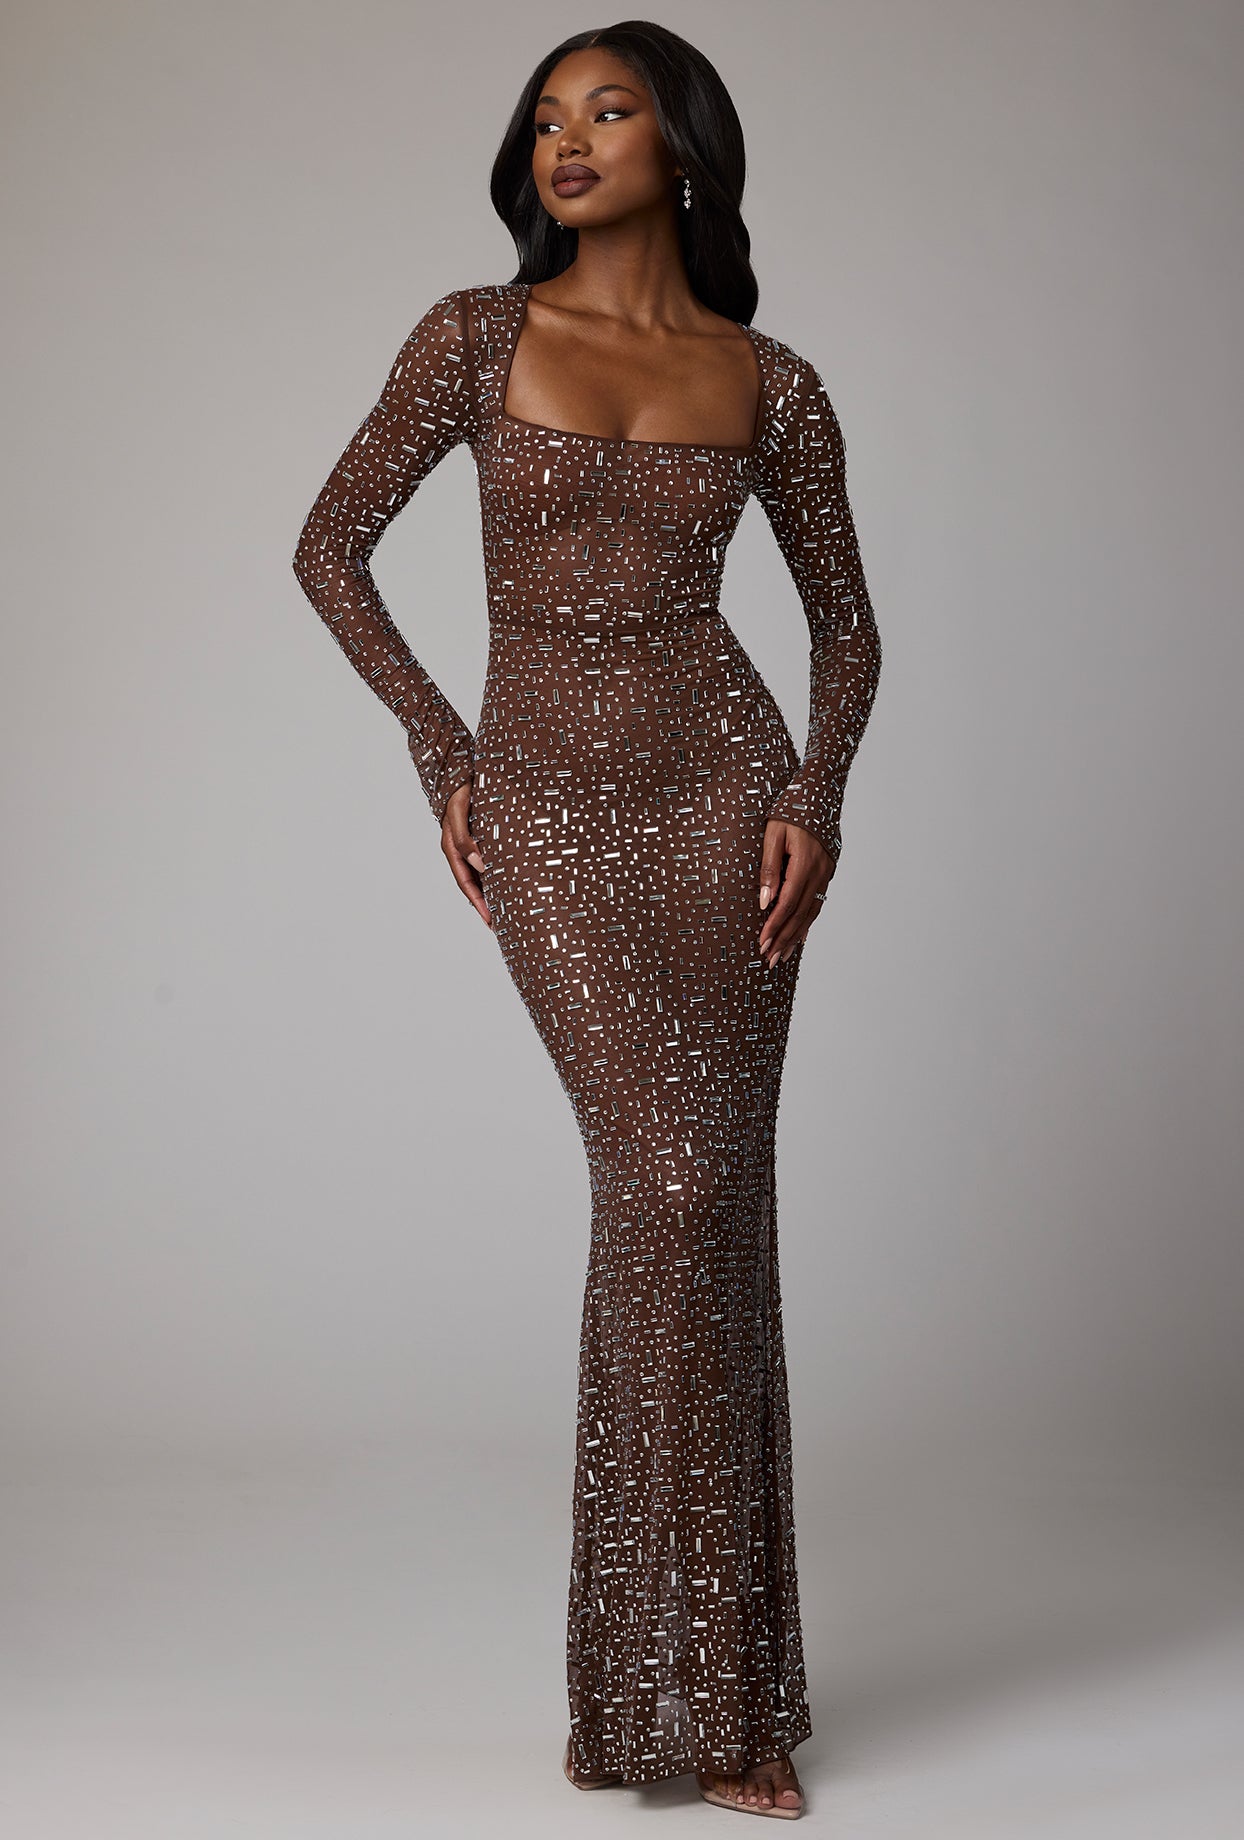 Isabeau Sheer Embellished Long Sleeve Evening Gown in Deep Cocoa